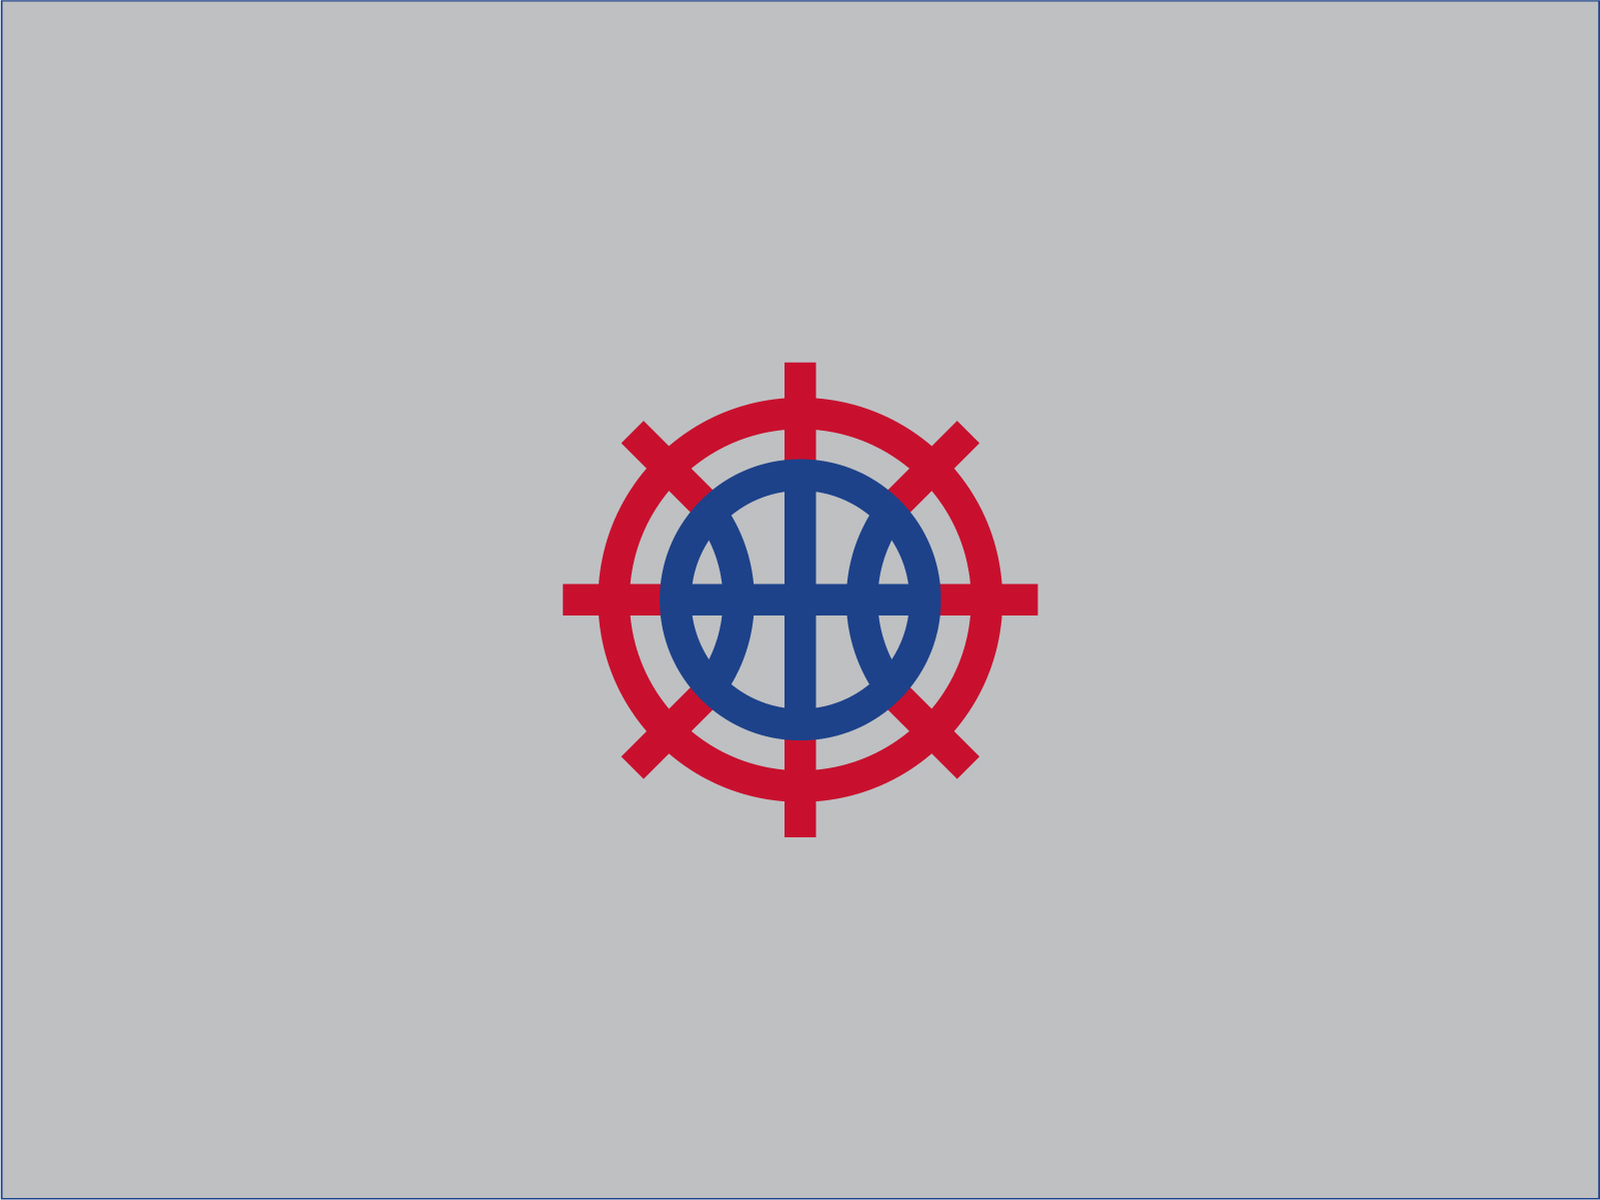 Los Angeles Clippers Logo Rebrand by Kevin Carlisle on Dribbble